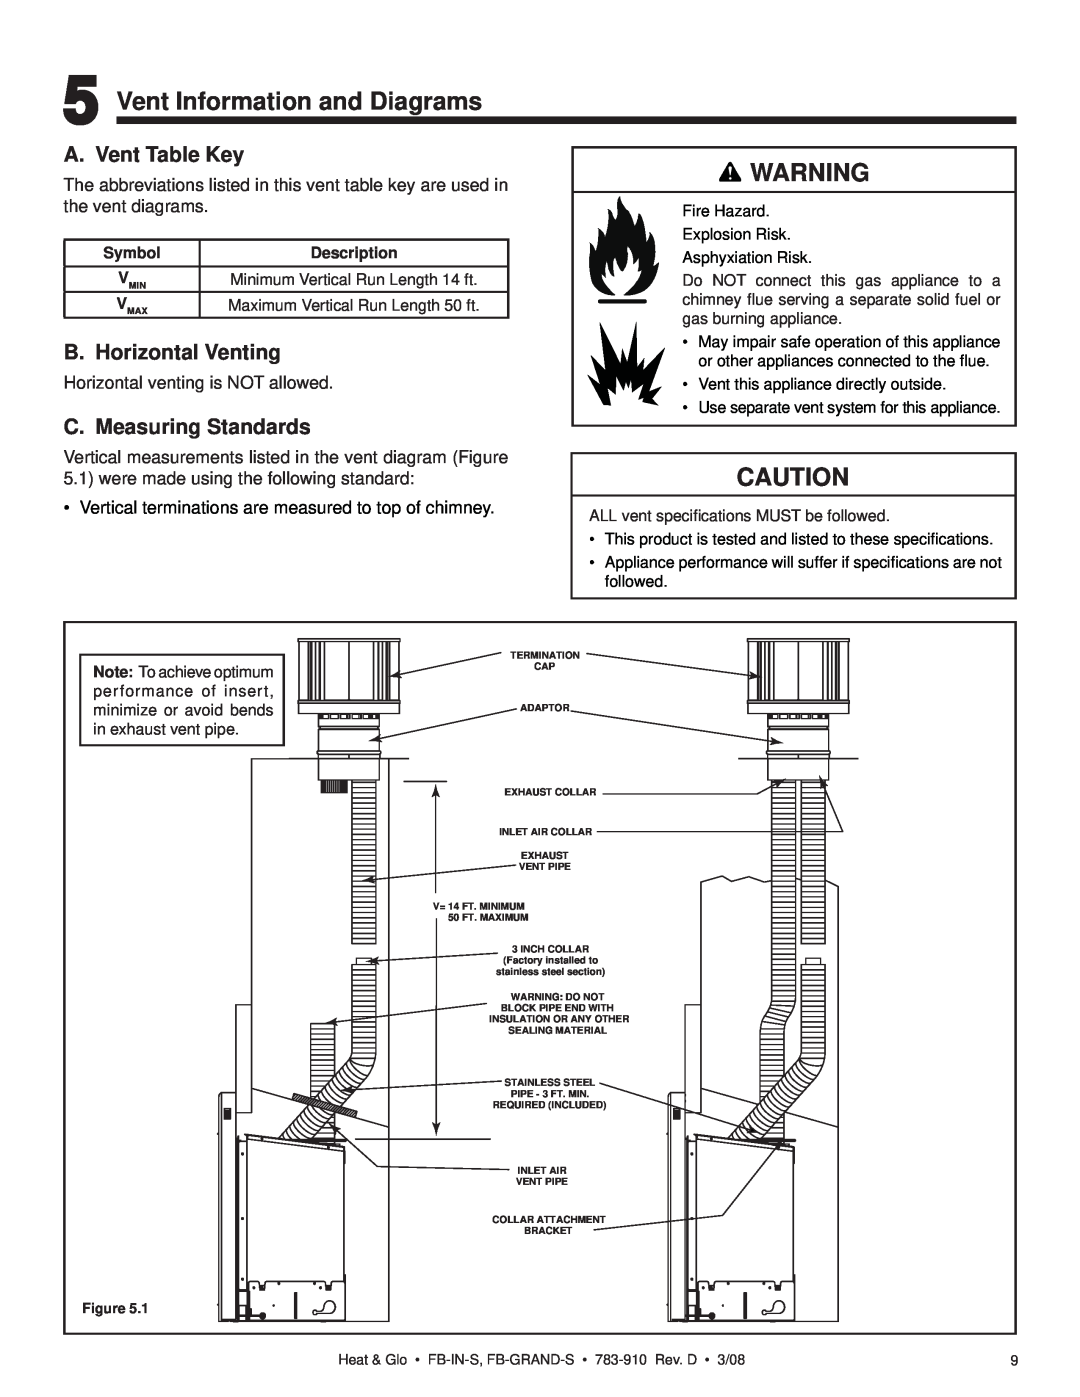 Heat & Glo LifeStyle FB-IN-S Vent Information and Diagrams, A. Vent Table Key, B. Horizontal Venting, Symbol, Description 